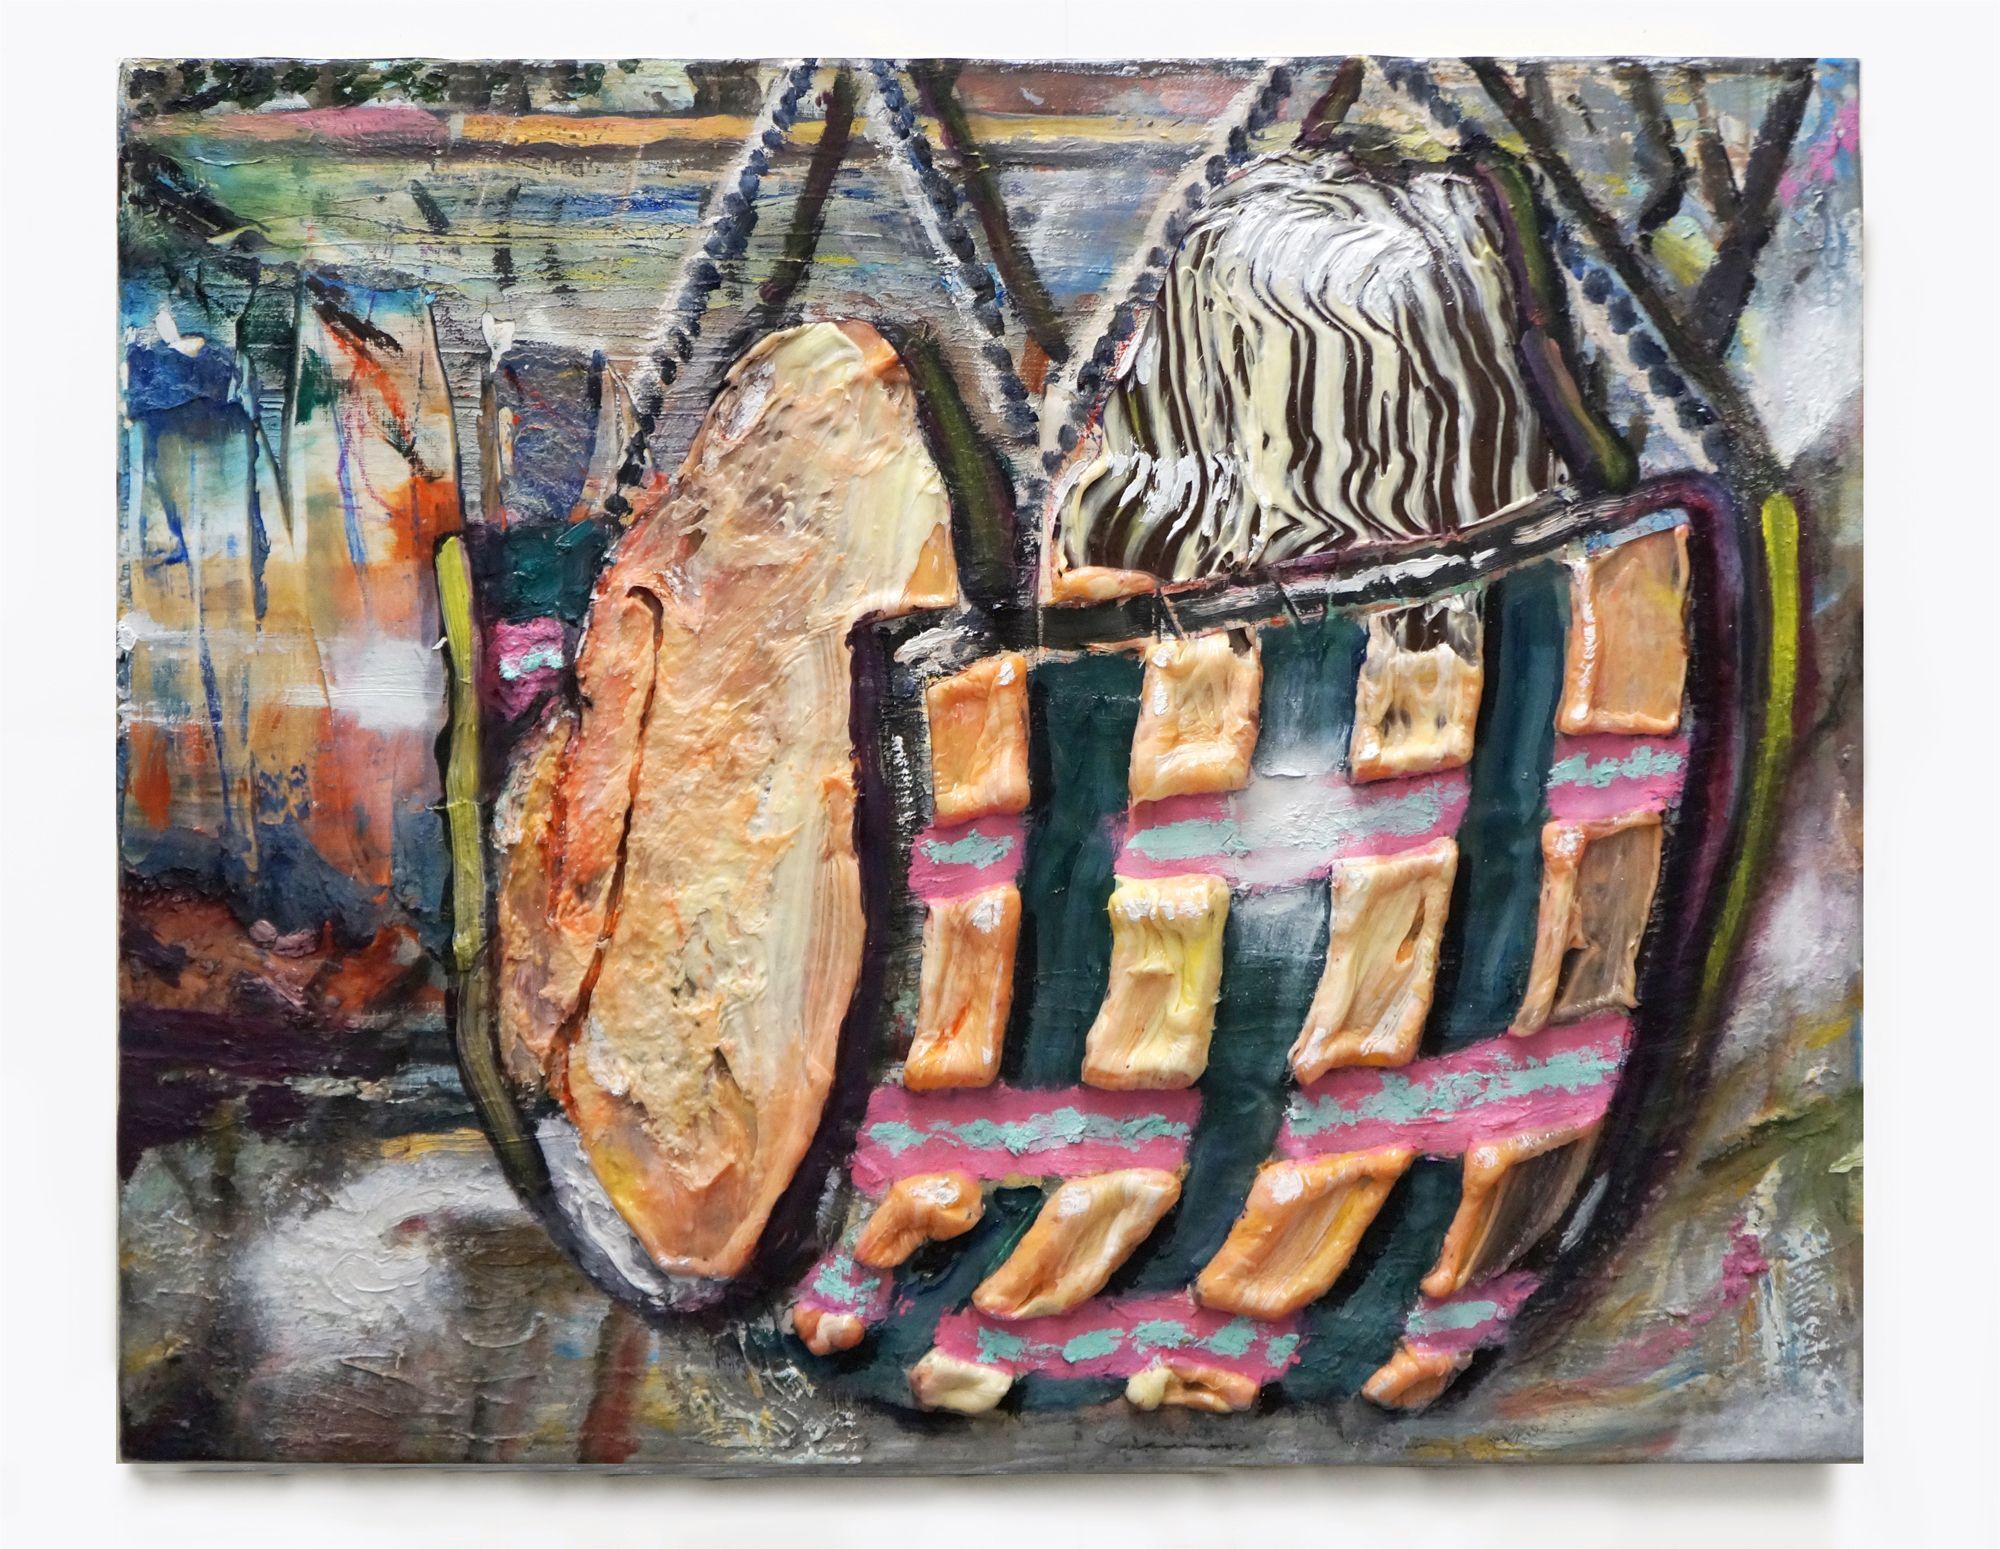 ZIG ZAG HAMMOCK - oil, enamel and silicone on canvas- pink, blue, tan texture - Mixed Media Art by Eleanor Aldrich